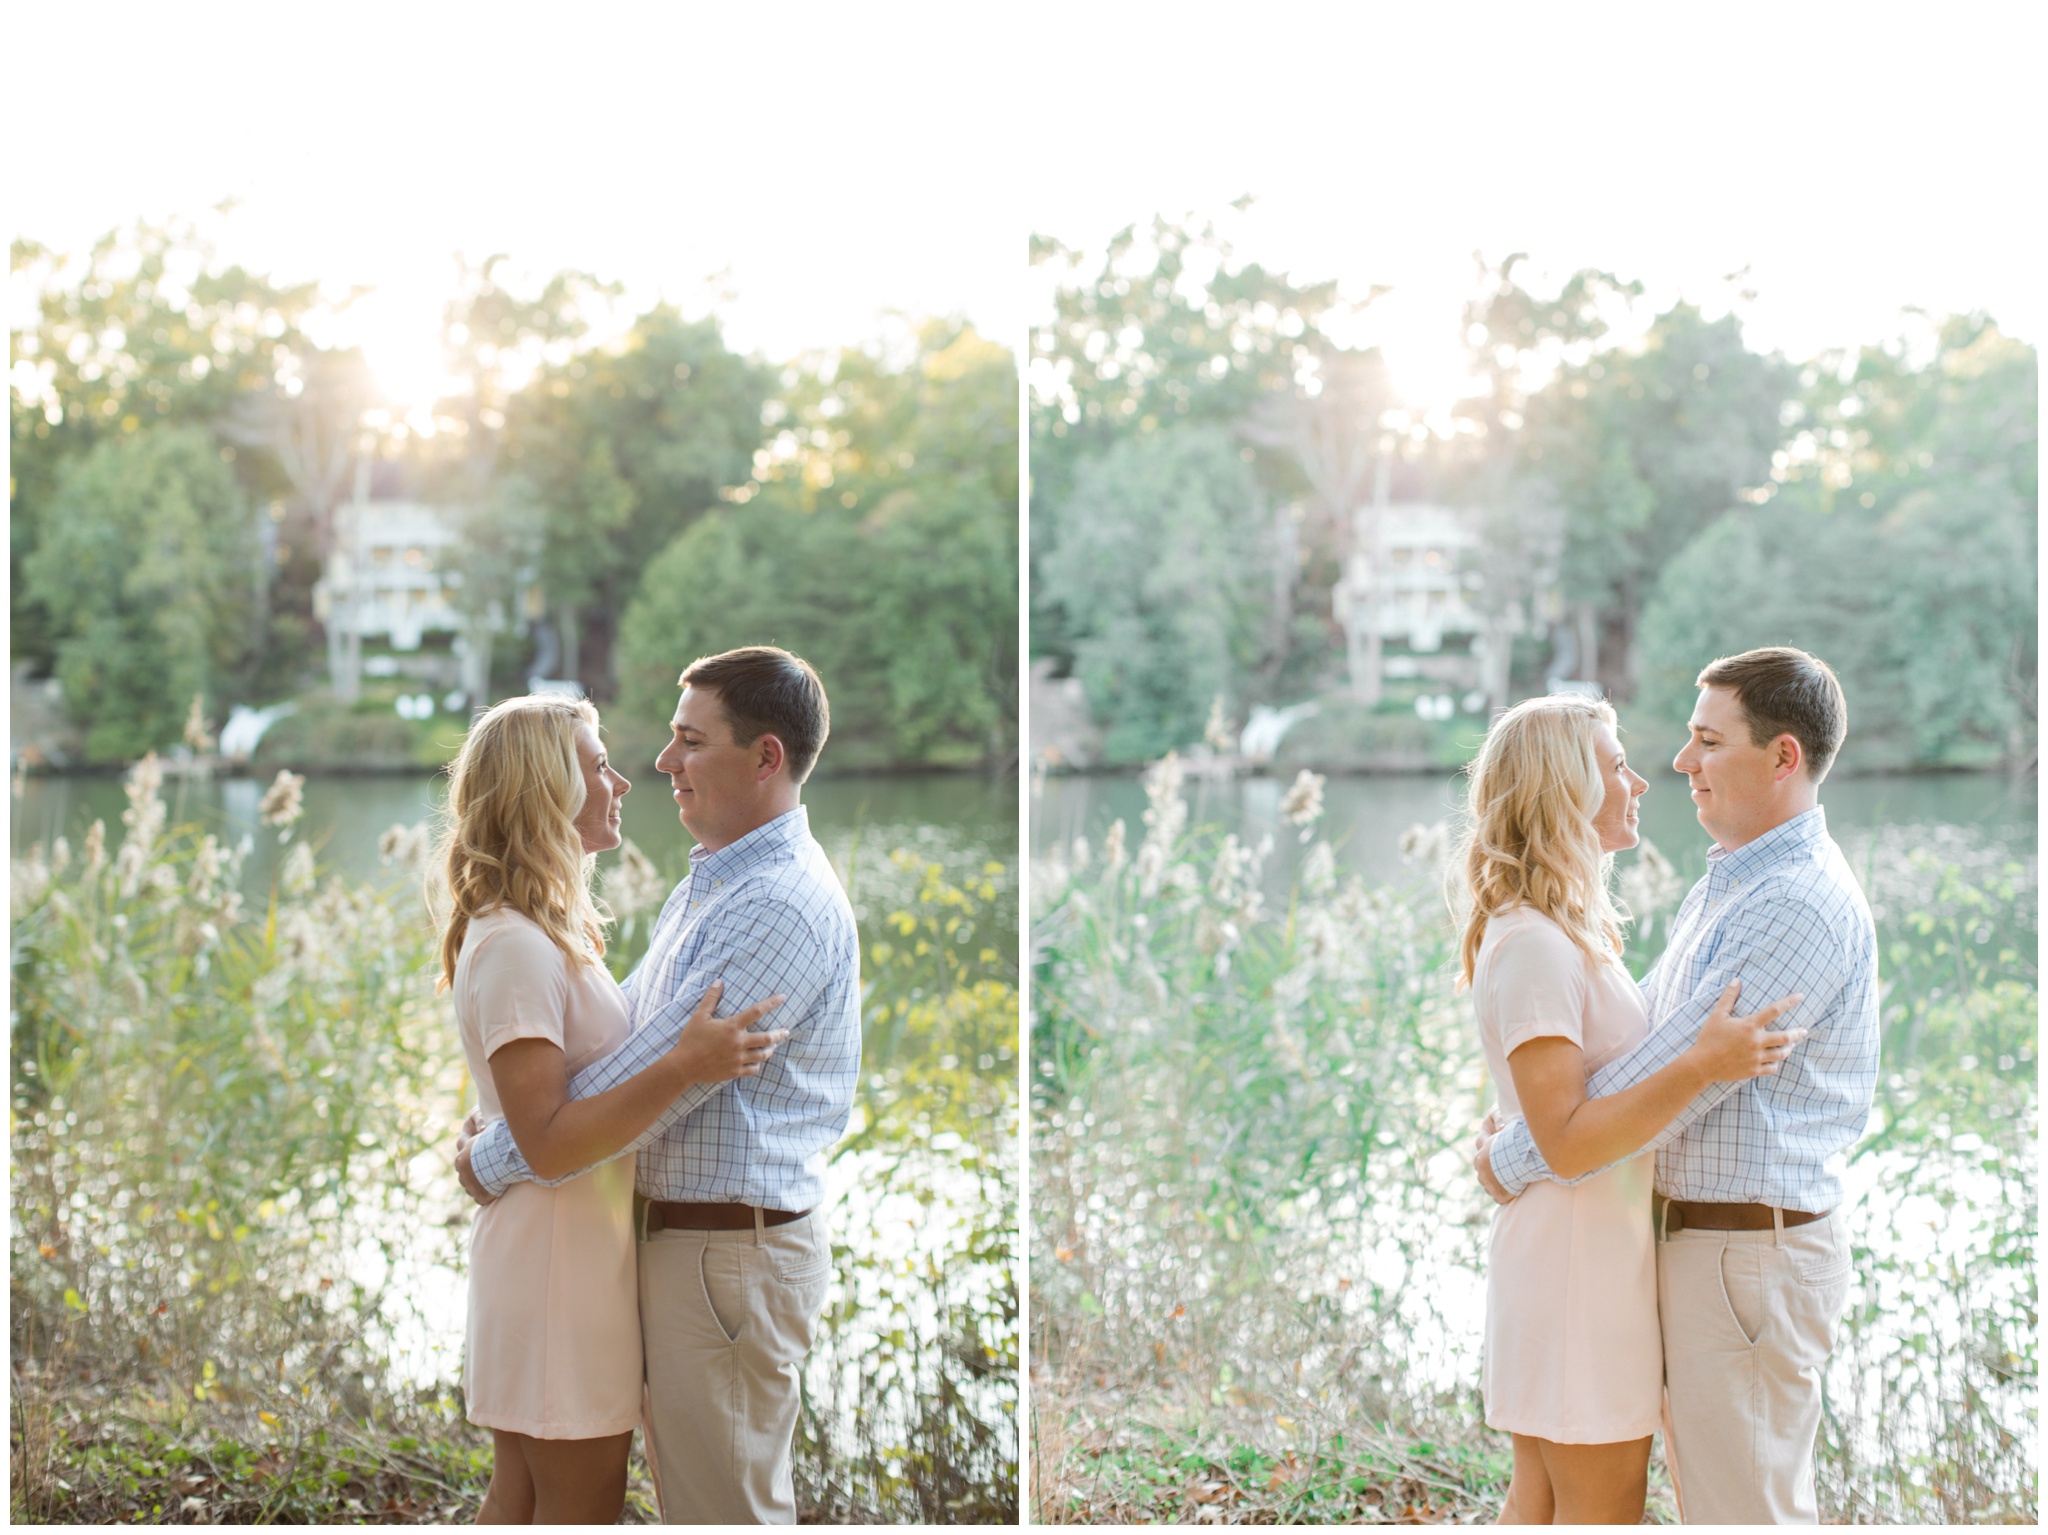 wedding photographer editing before and after photos